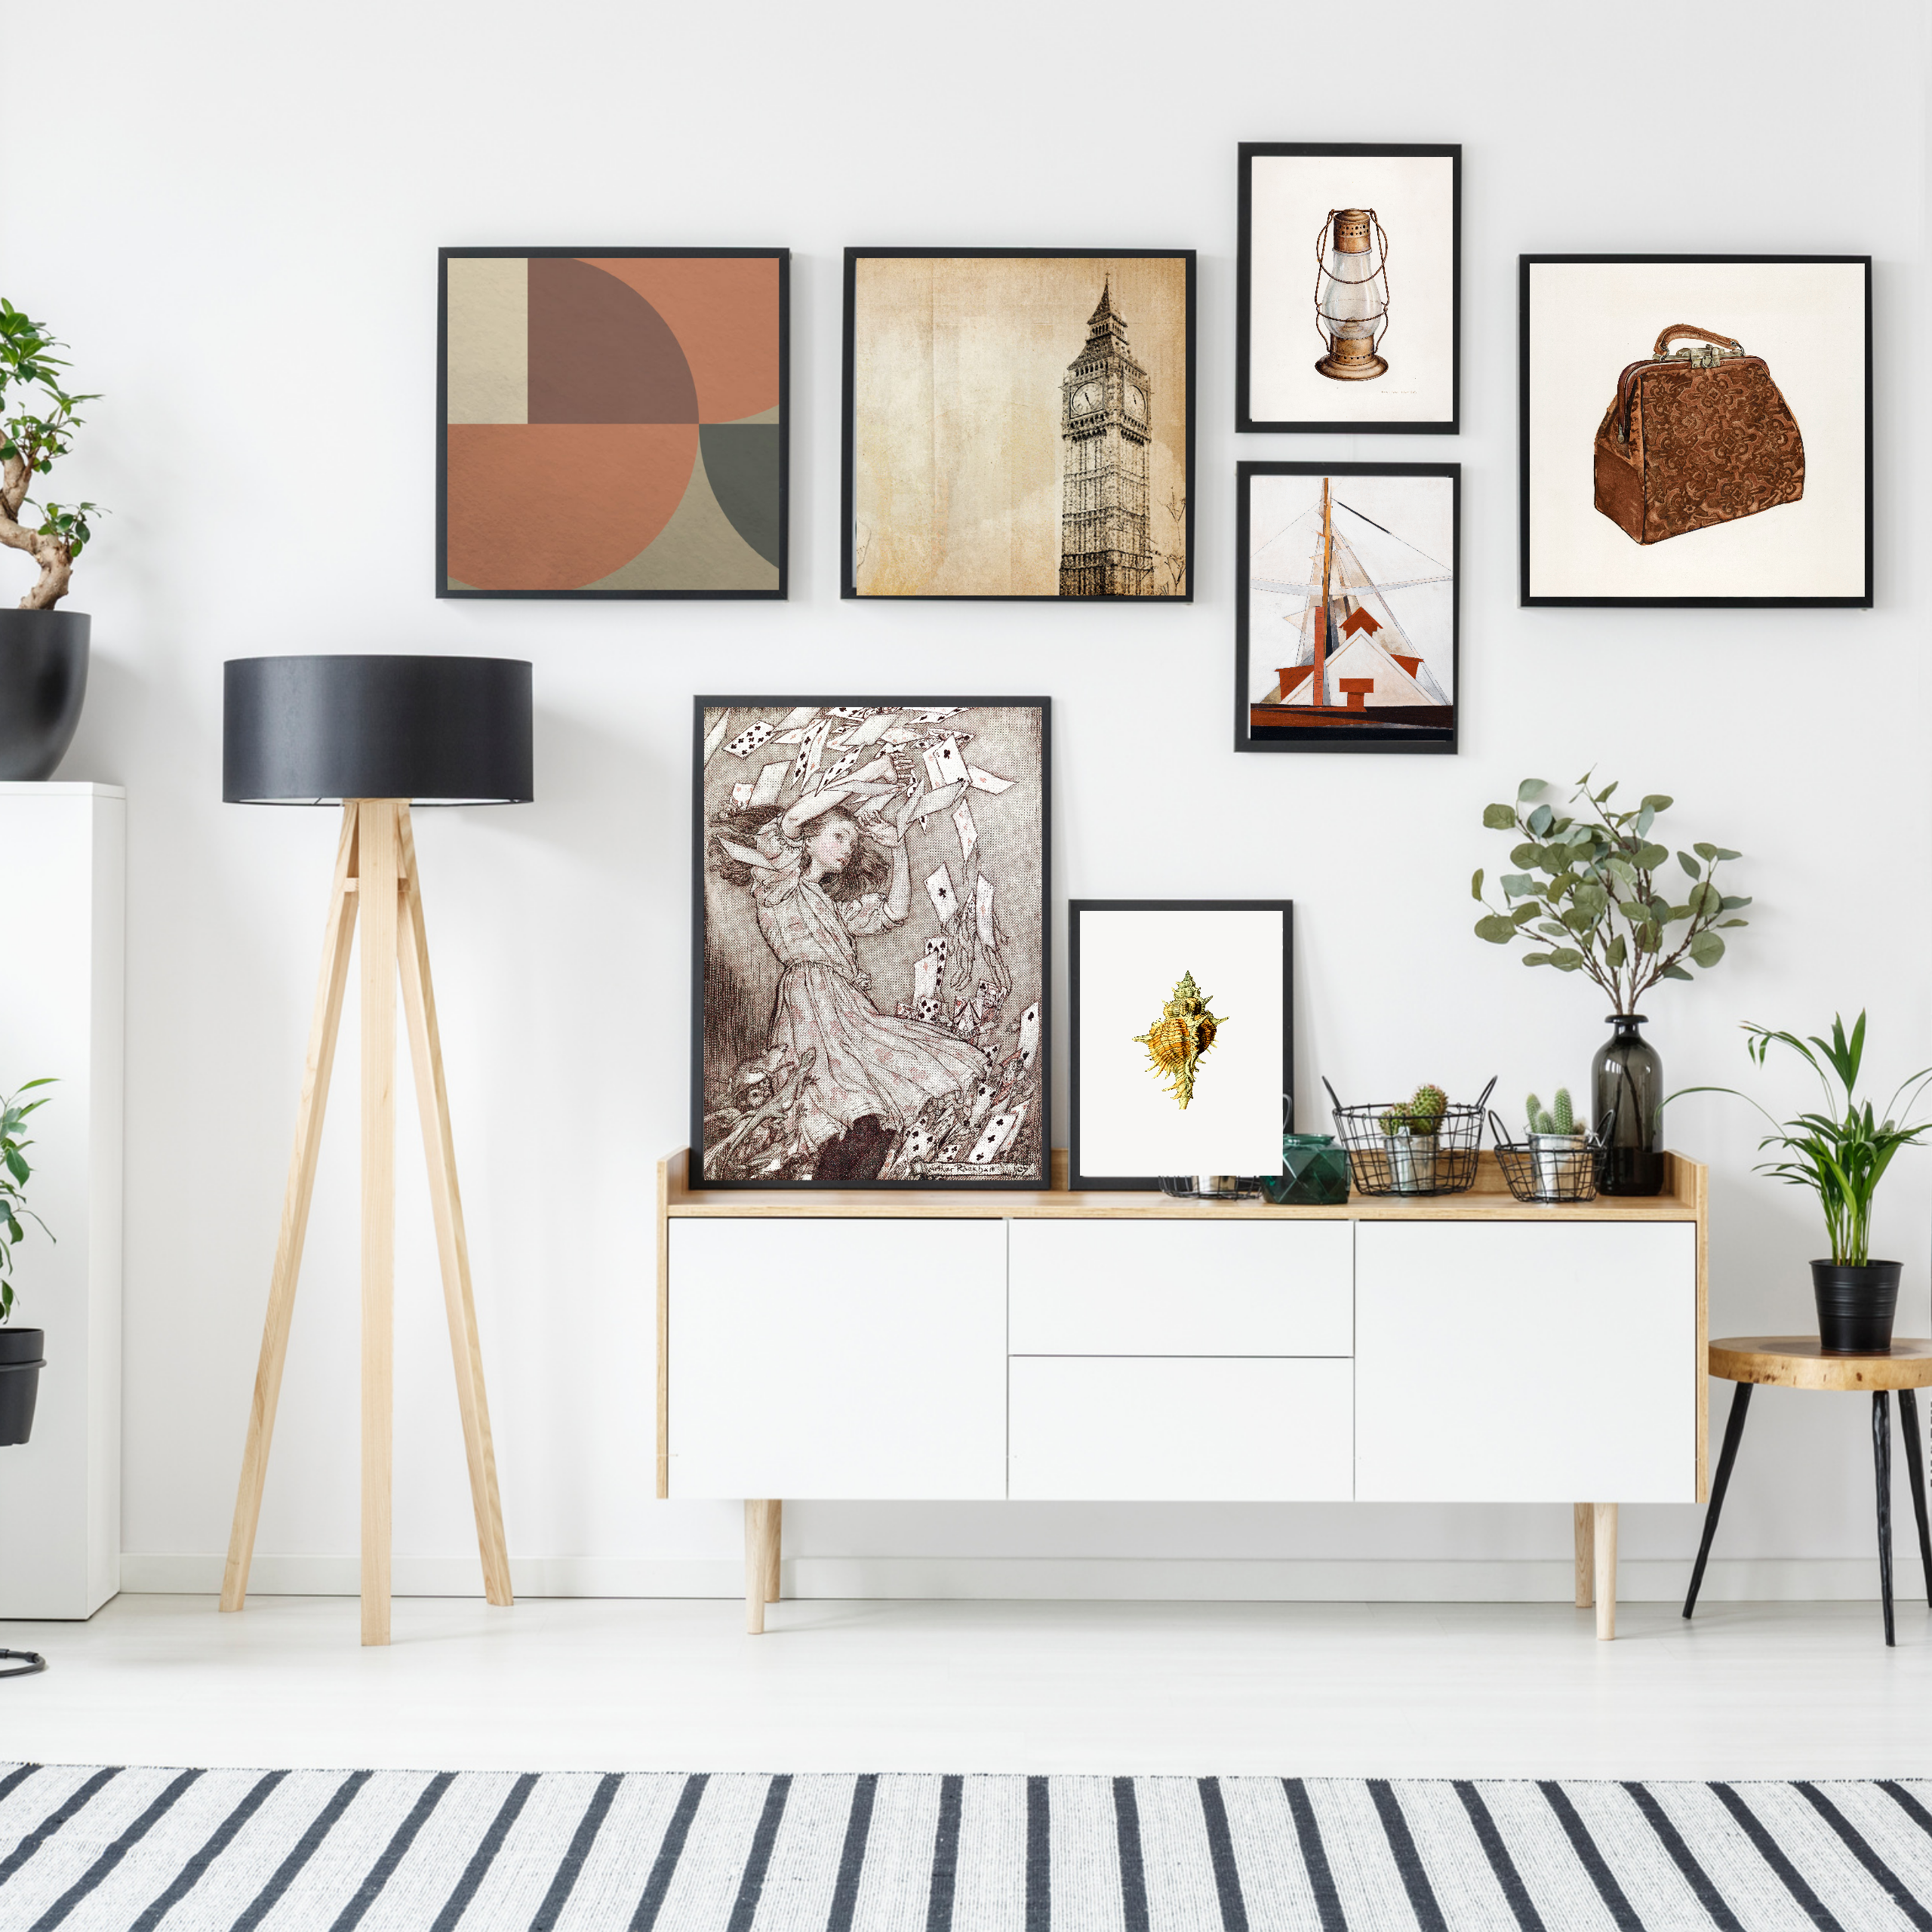 Tips for creating a Gallery Wall in your home